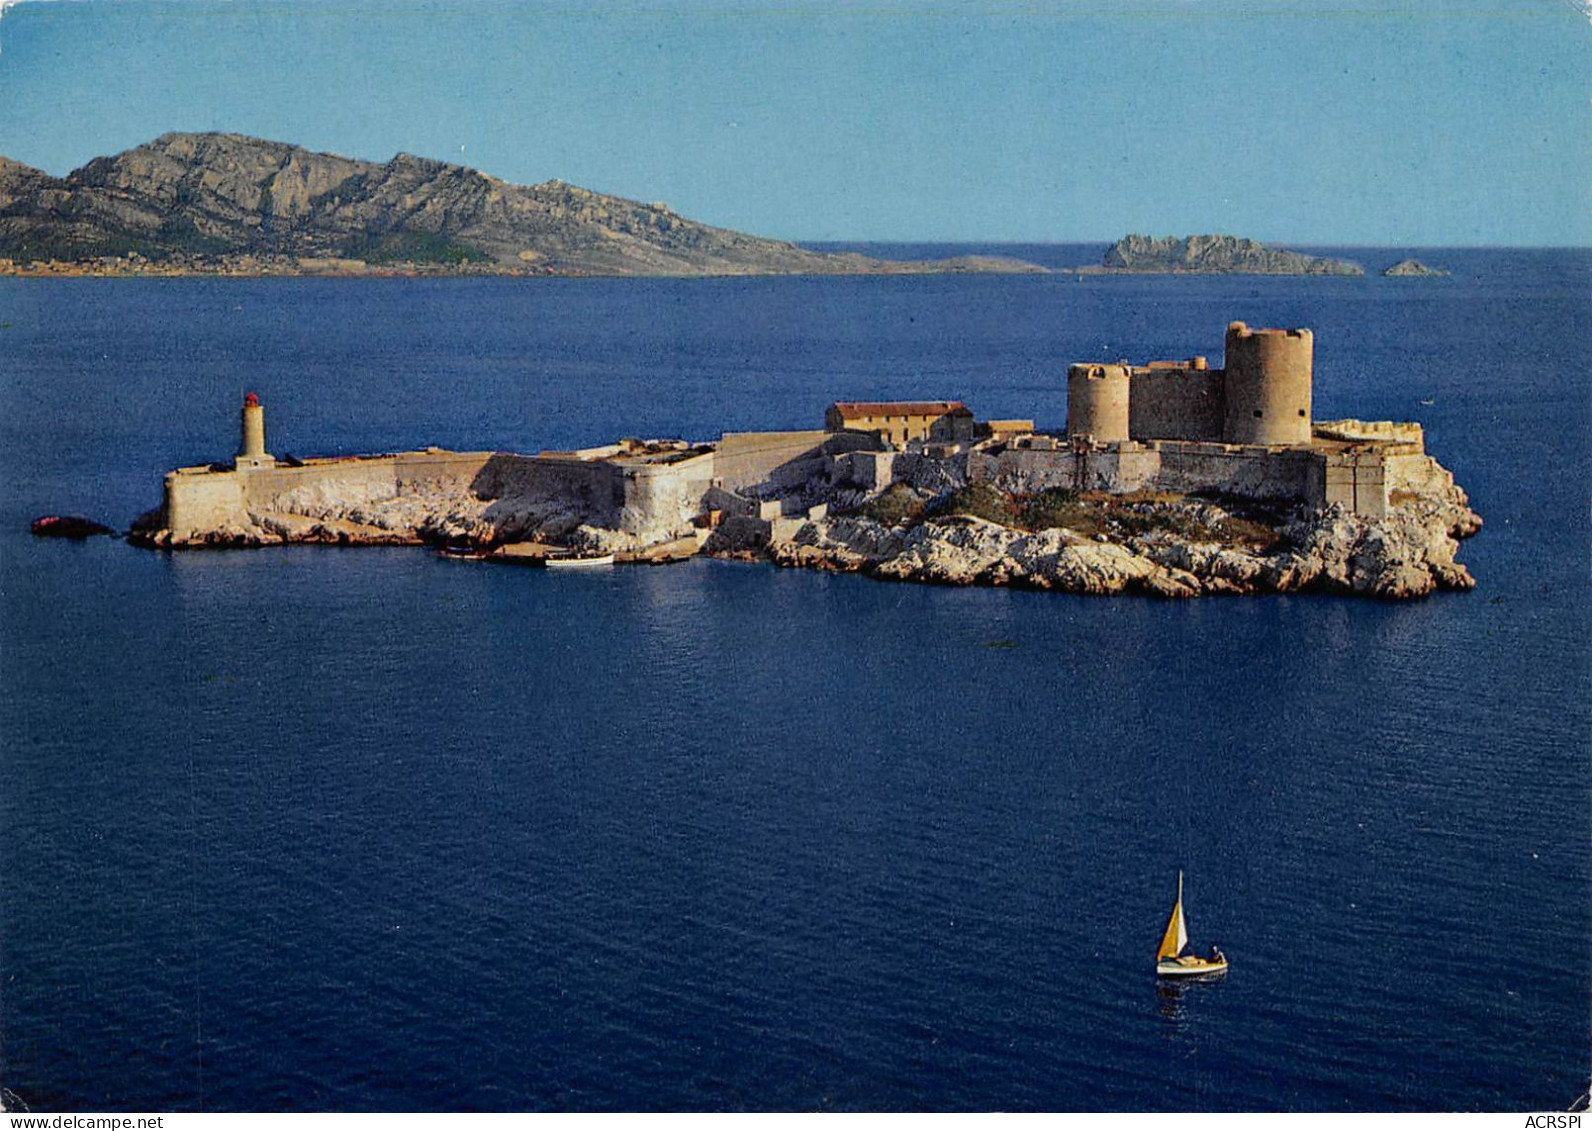 13 MARSEILLE Chateau D' IF (Scan R/V) N° 73 \MS9092 - Old Port, Saint Victor, Le Panier